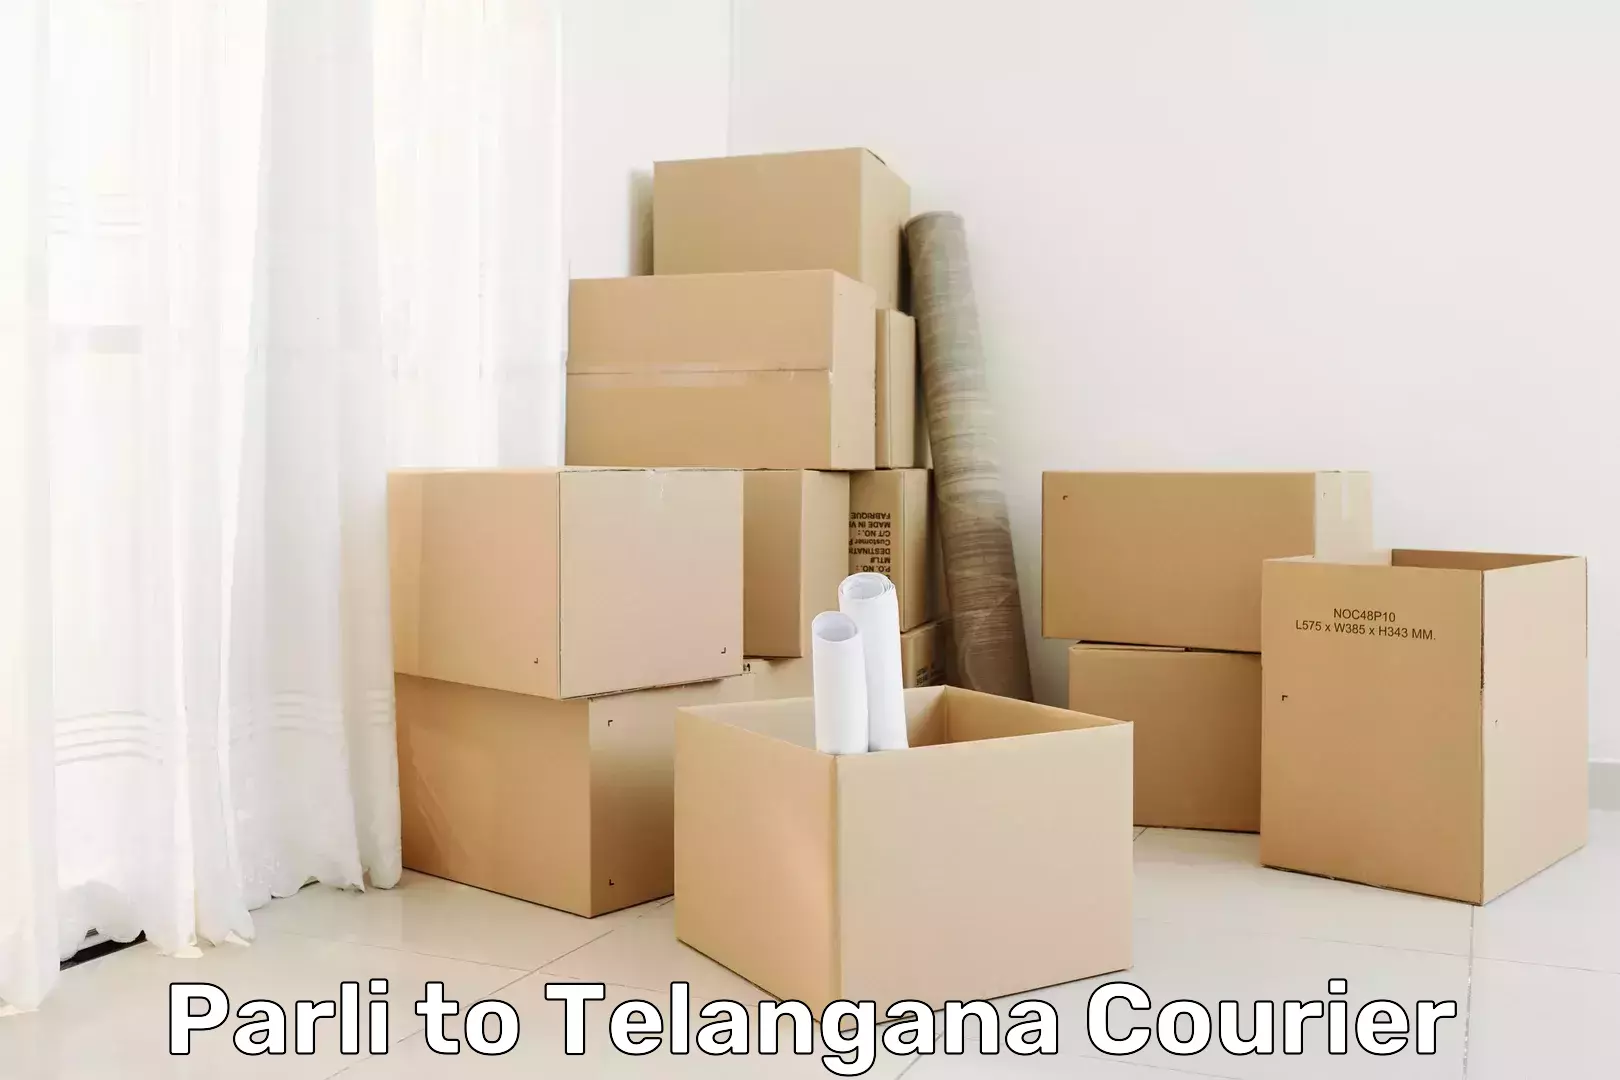 Reliable courier service Parli to Telangana